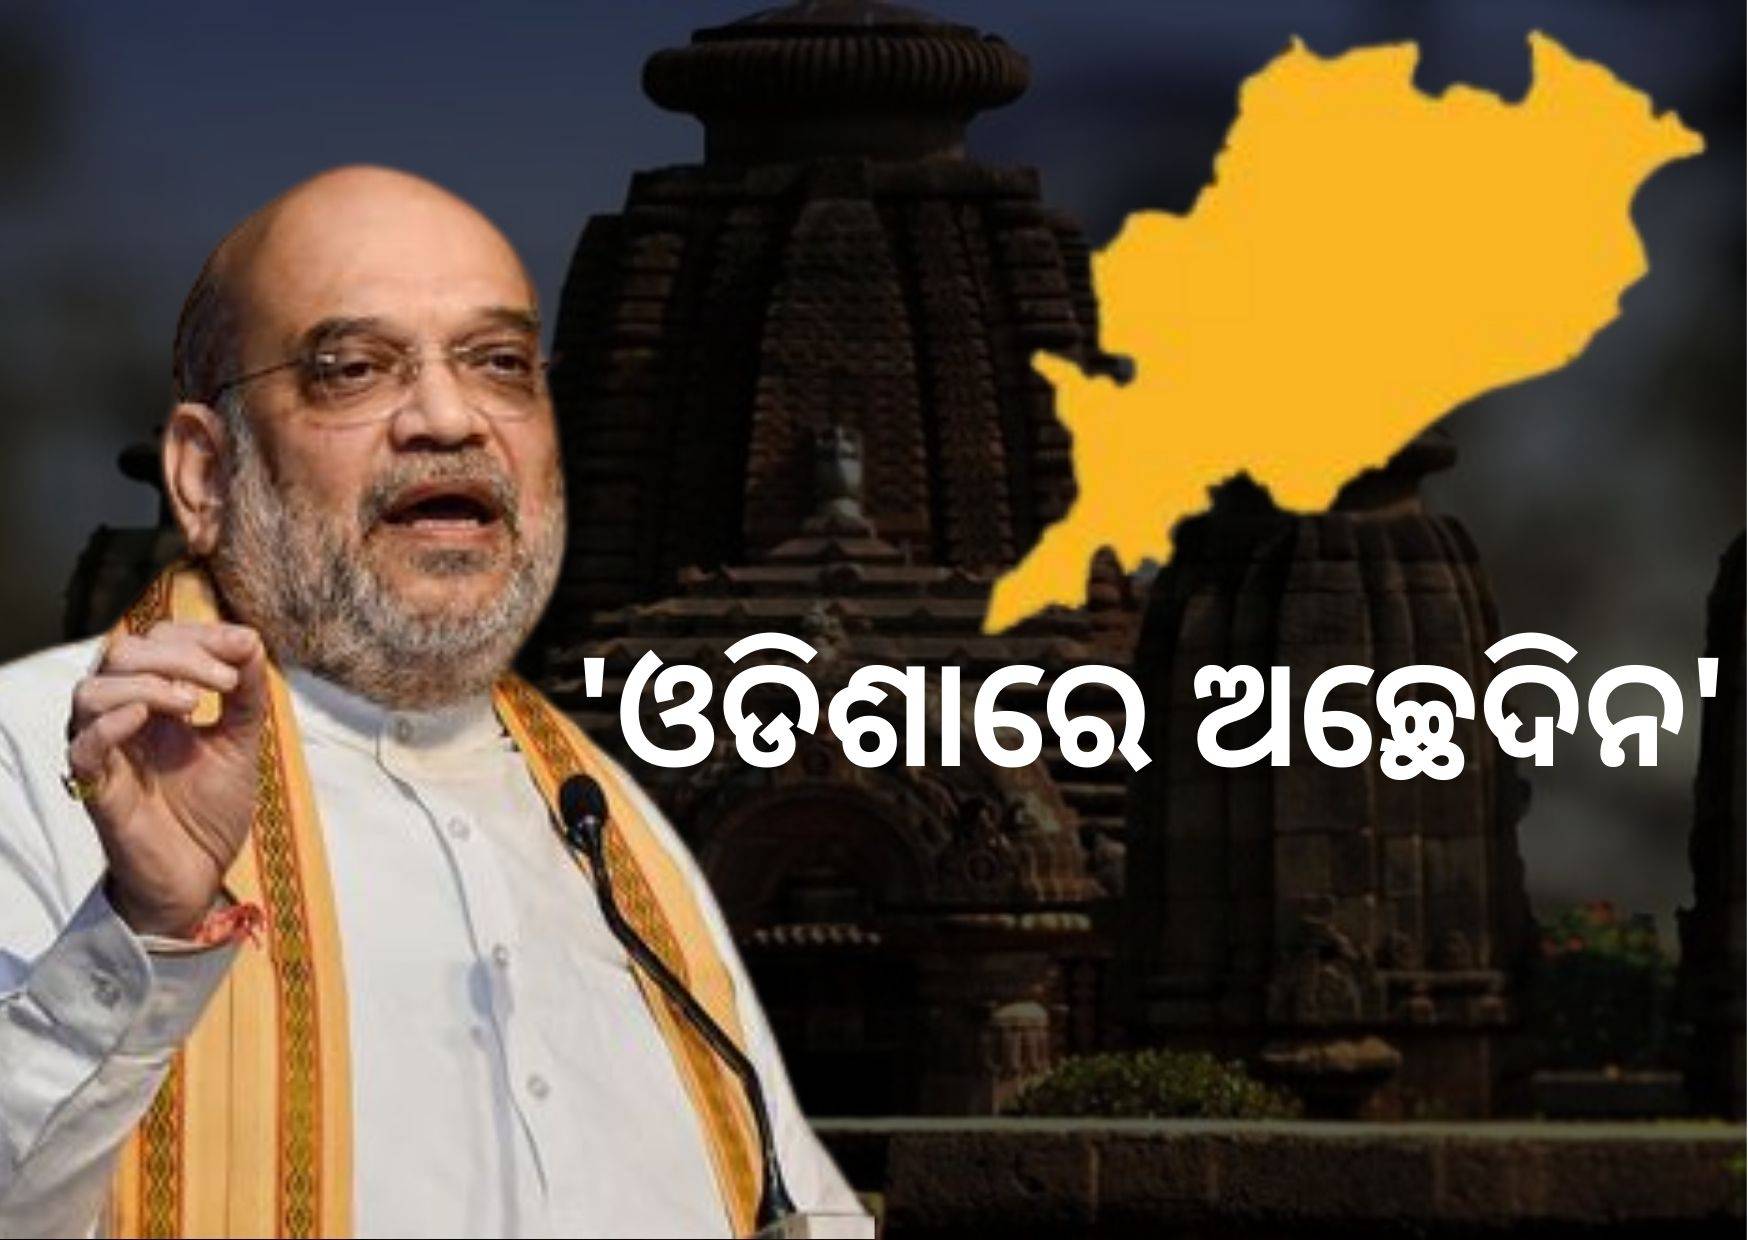 Acche Din have finally come,says Home Minister Amit Shah in odisha